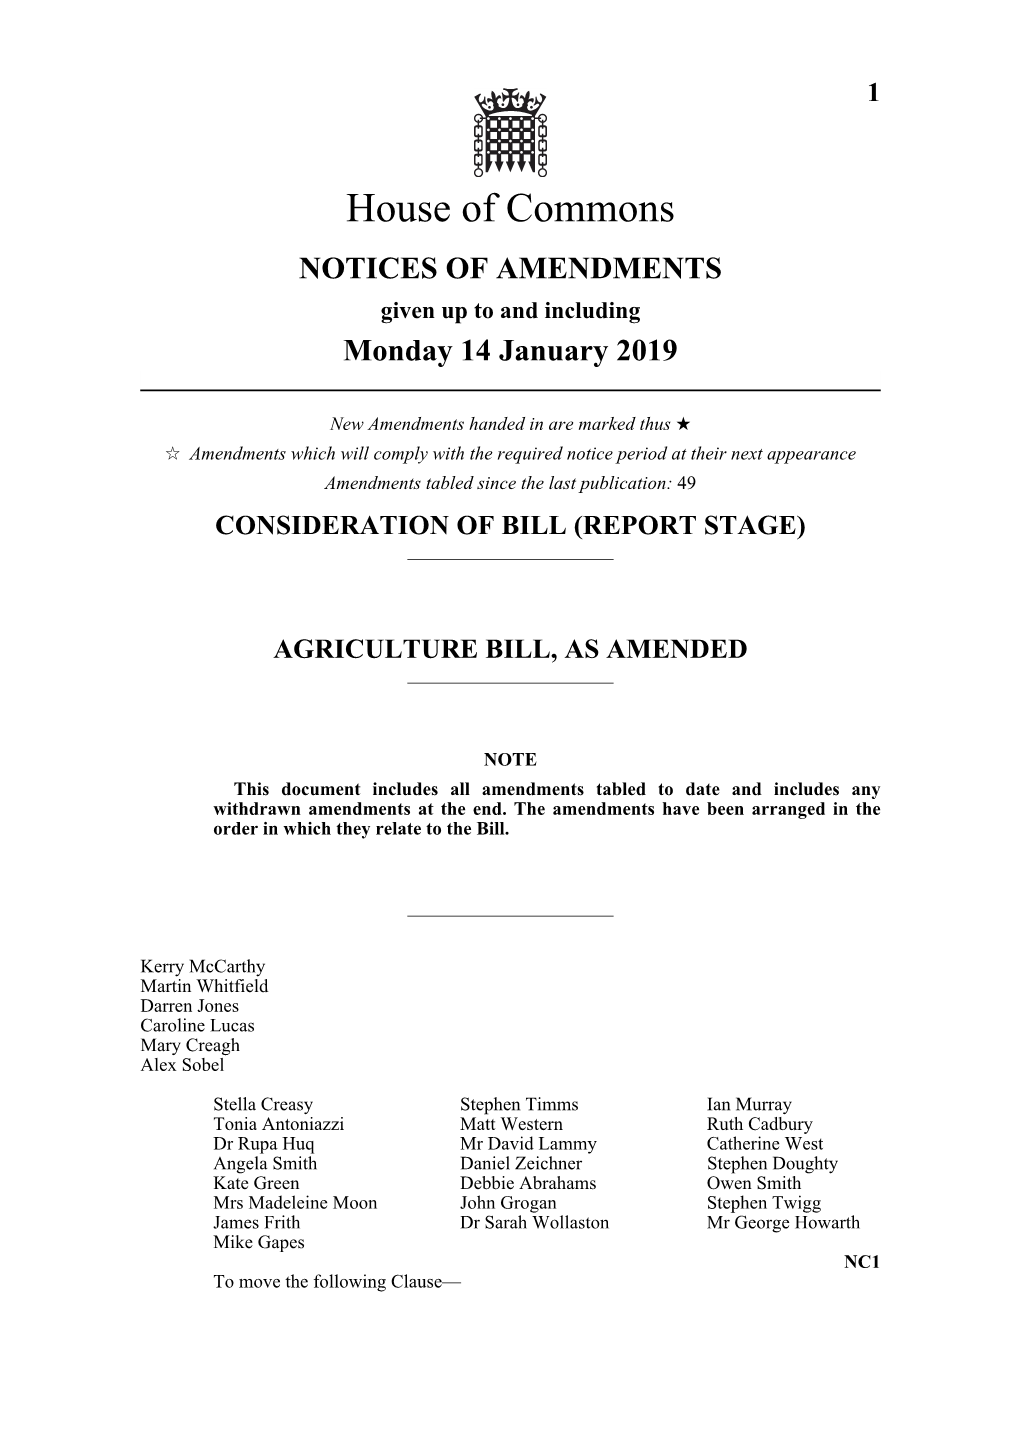 AMENDMENTS Given up to and Including Monday 14 January 2019